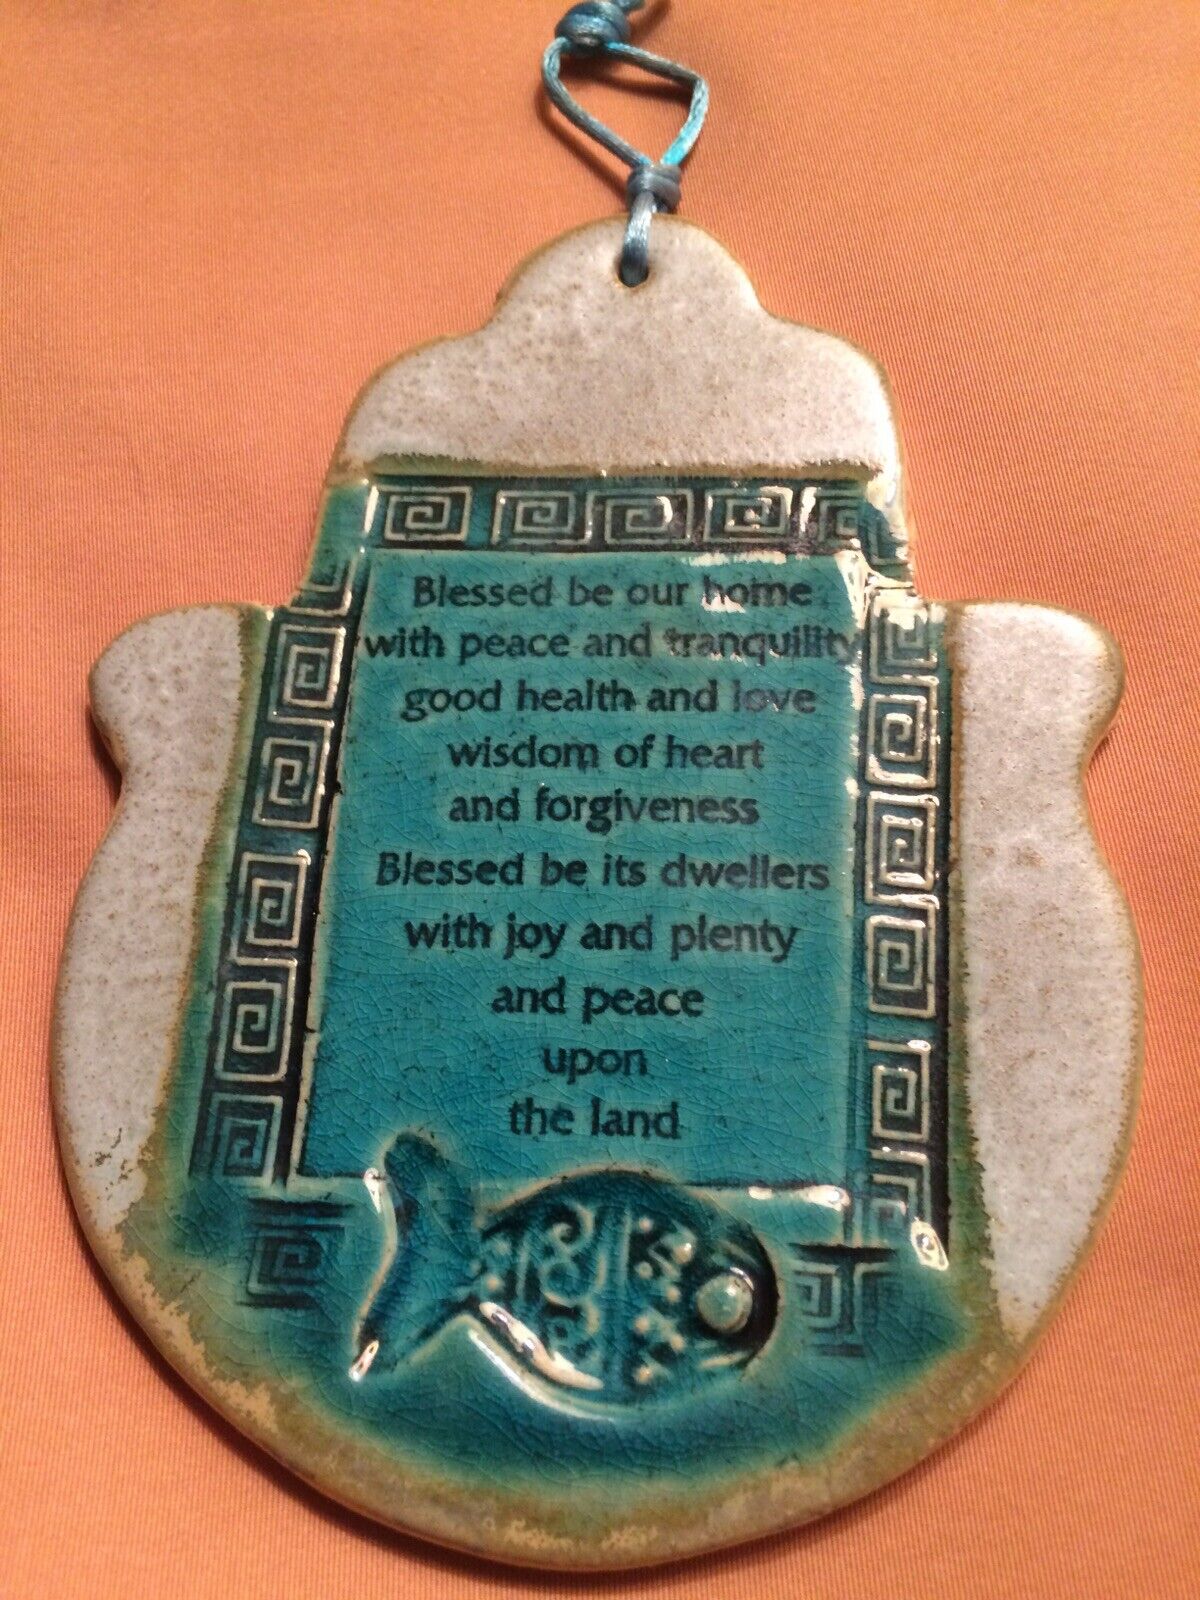 Blessing for the home HAMSA wall hanging amulet for home decor & good luck